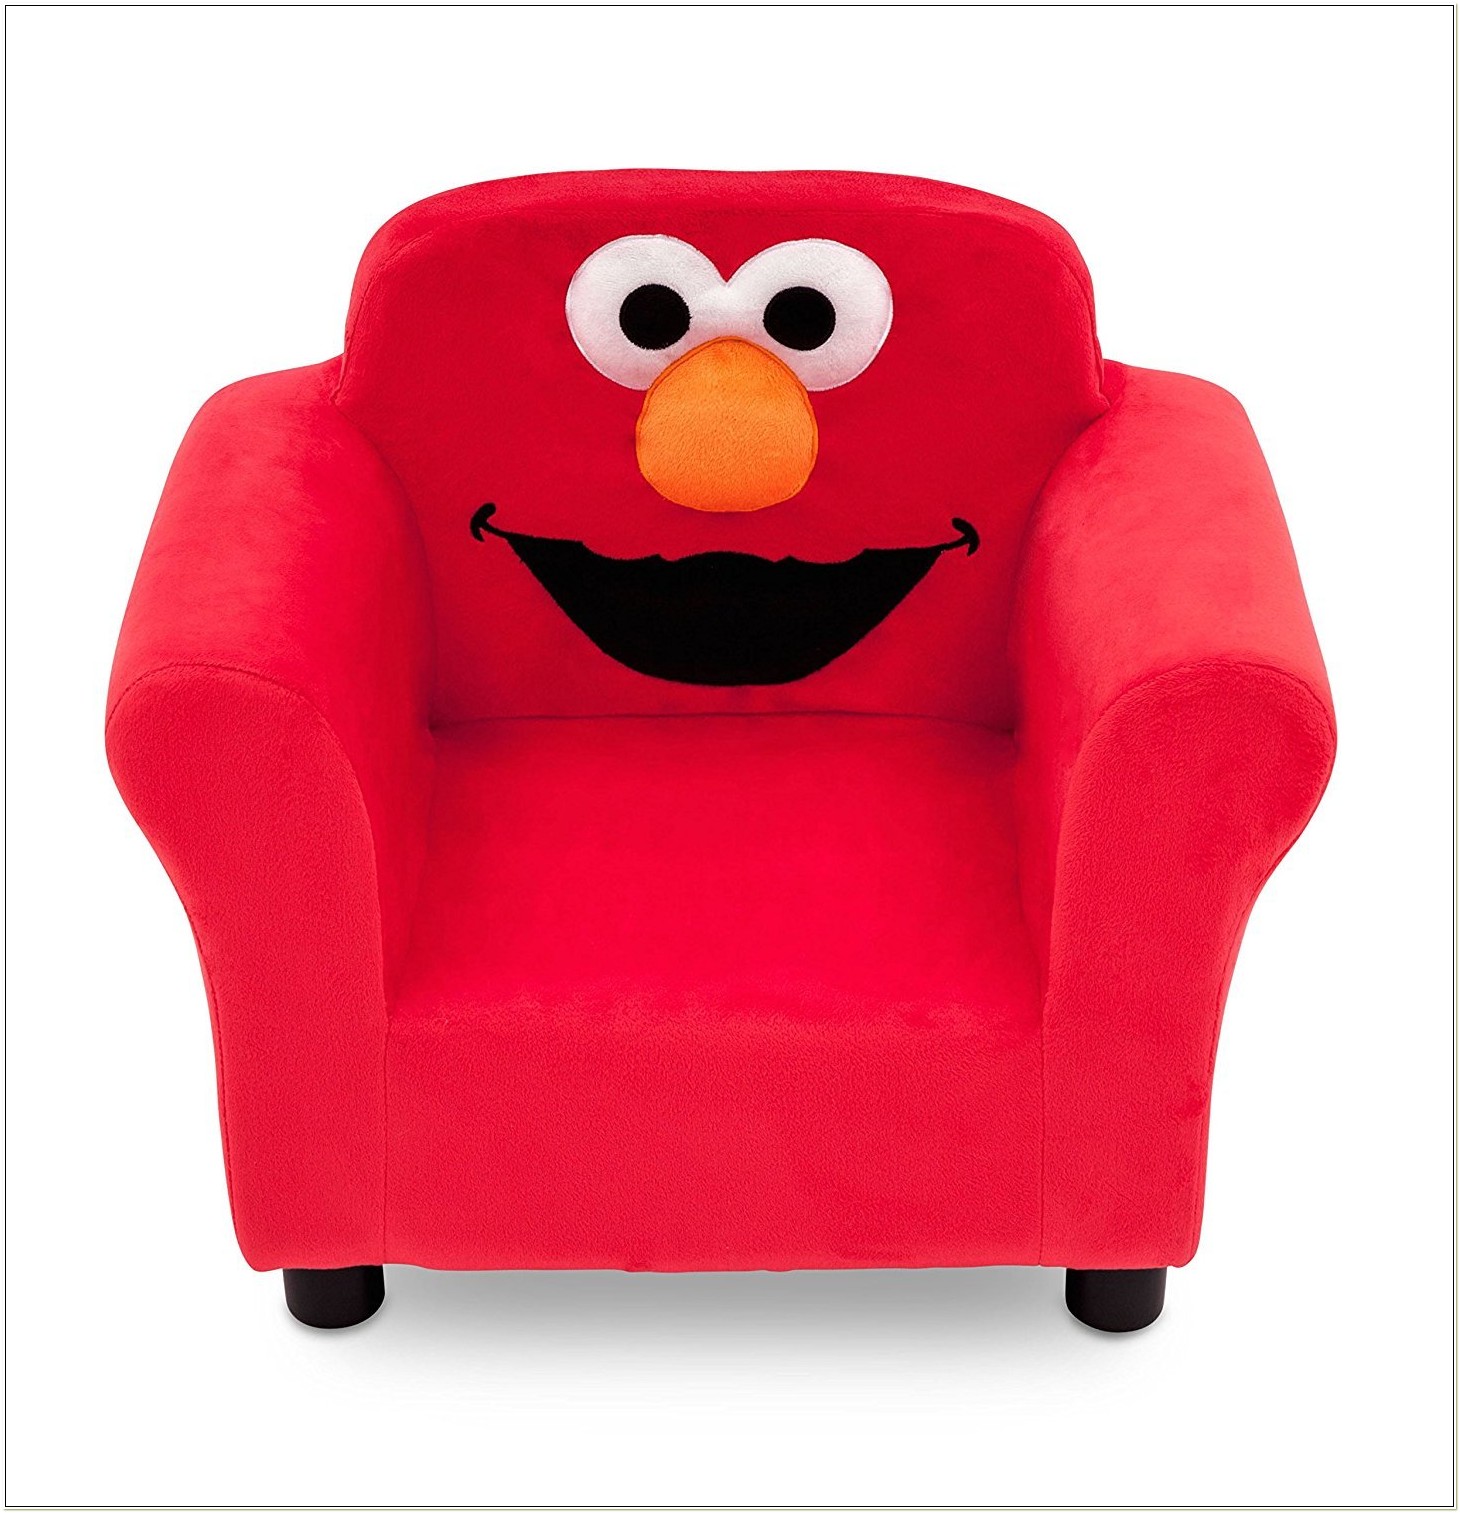 Elmo Giggle And Shake Chair - Chairs : Home Decorating Ideas #g96zzOJ6mB